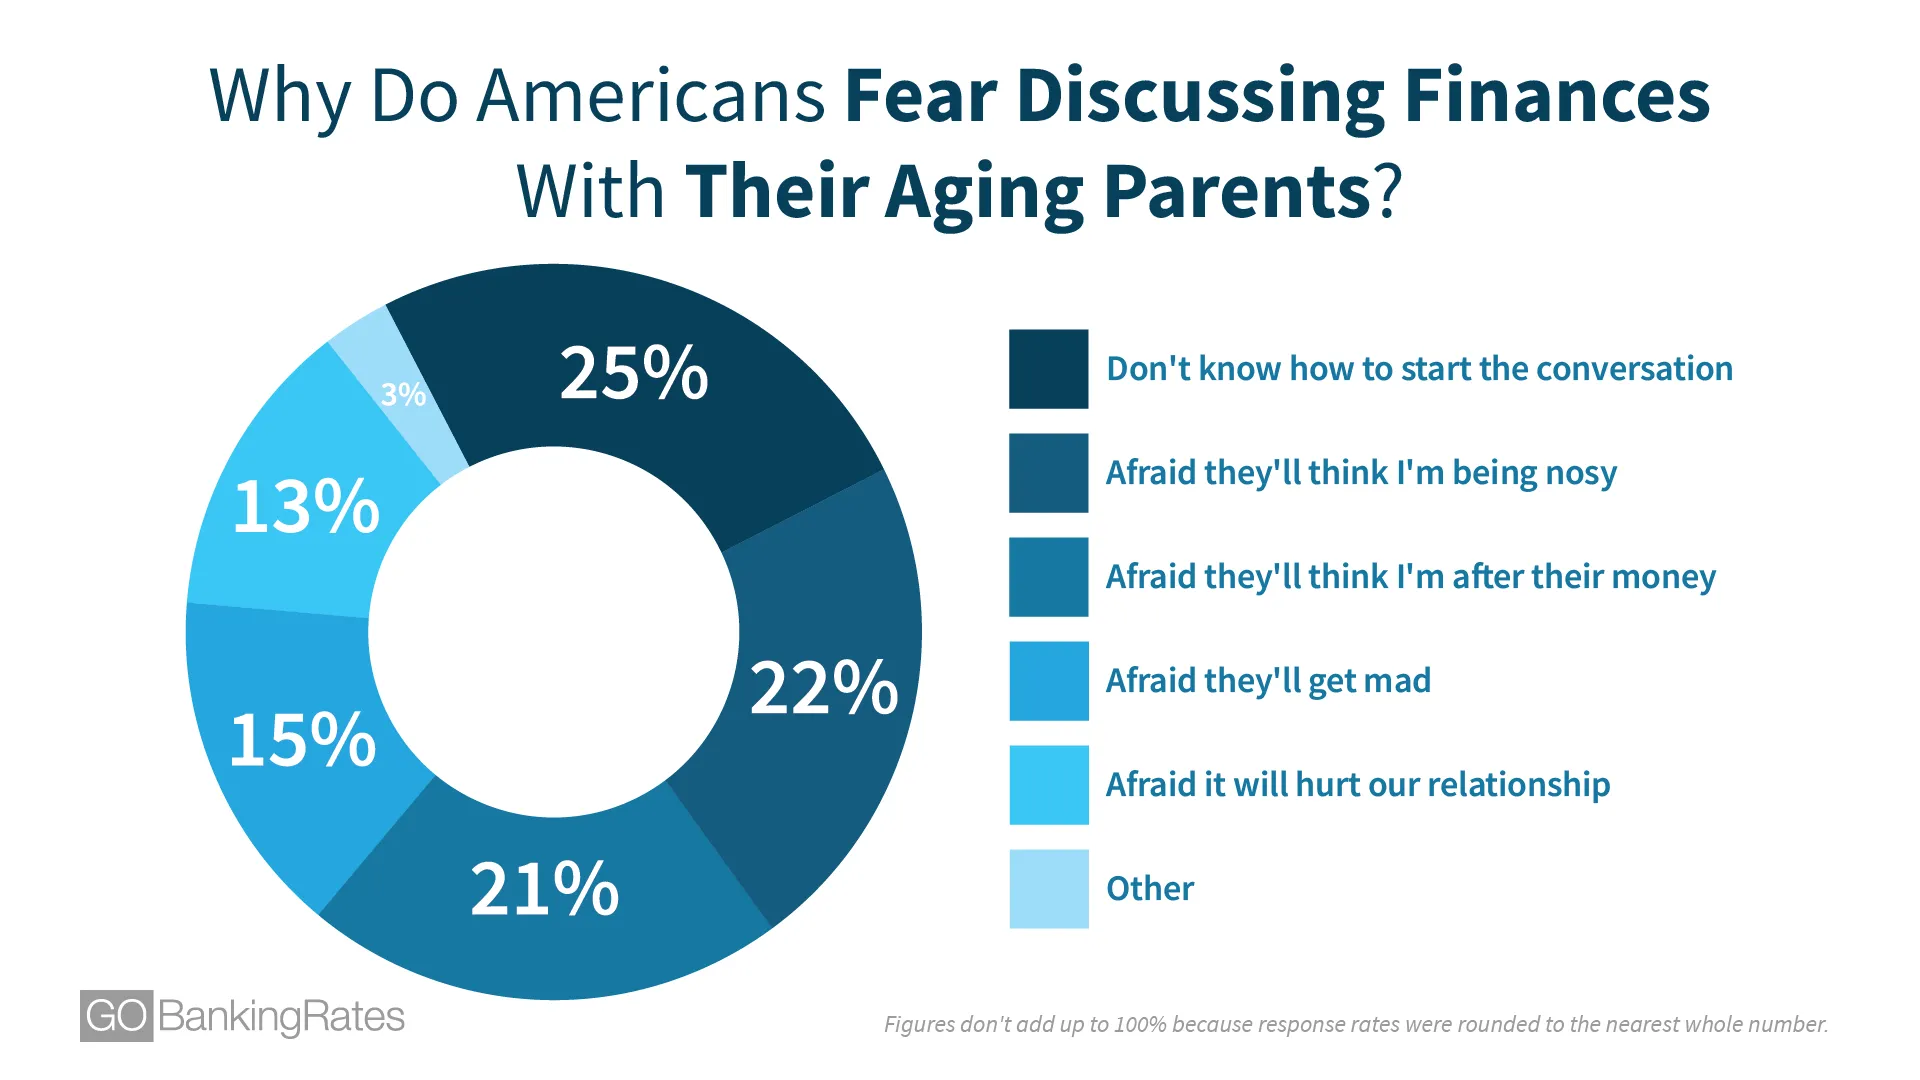 Why Do Americans Fear Discussing Finances With Their Aging Parents?